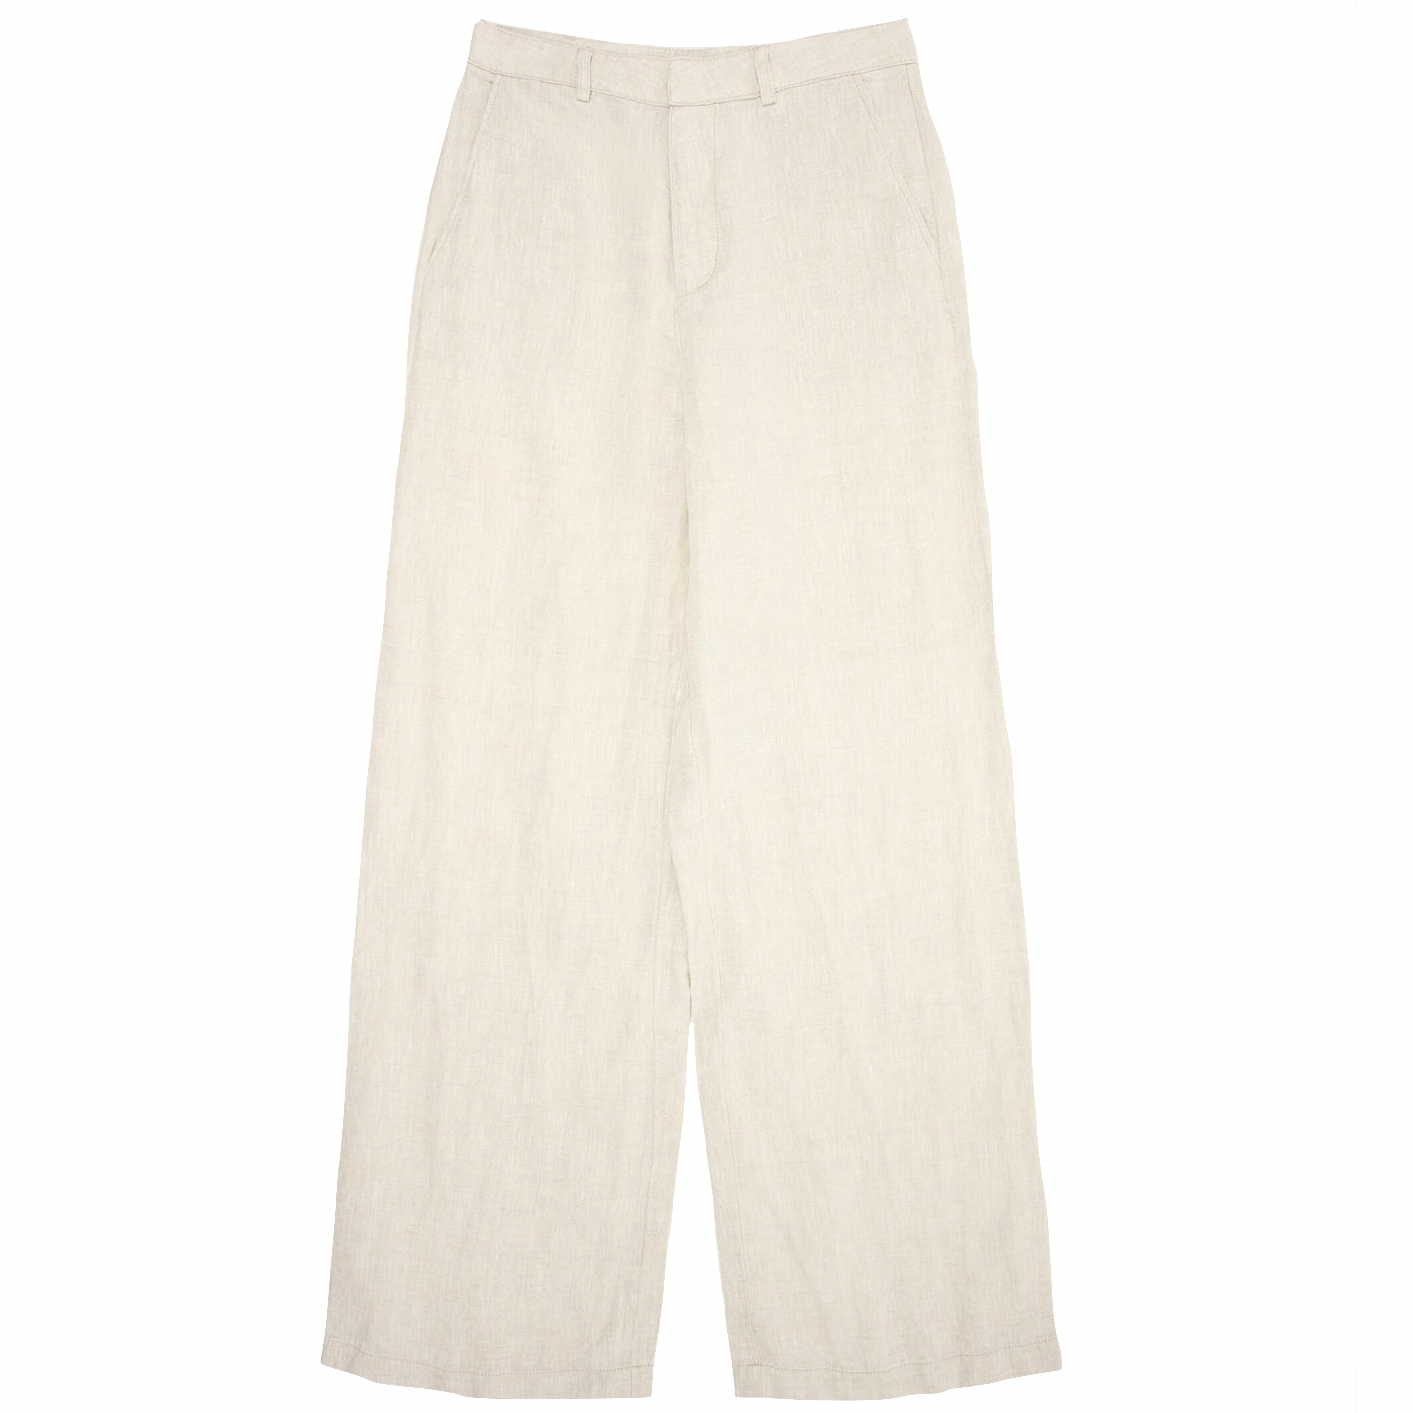 KnowledgeCotton Apparel KnowledgeCotton, Posey natural linen pants, light feather grey, L